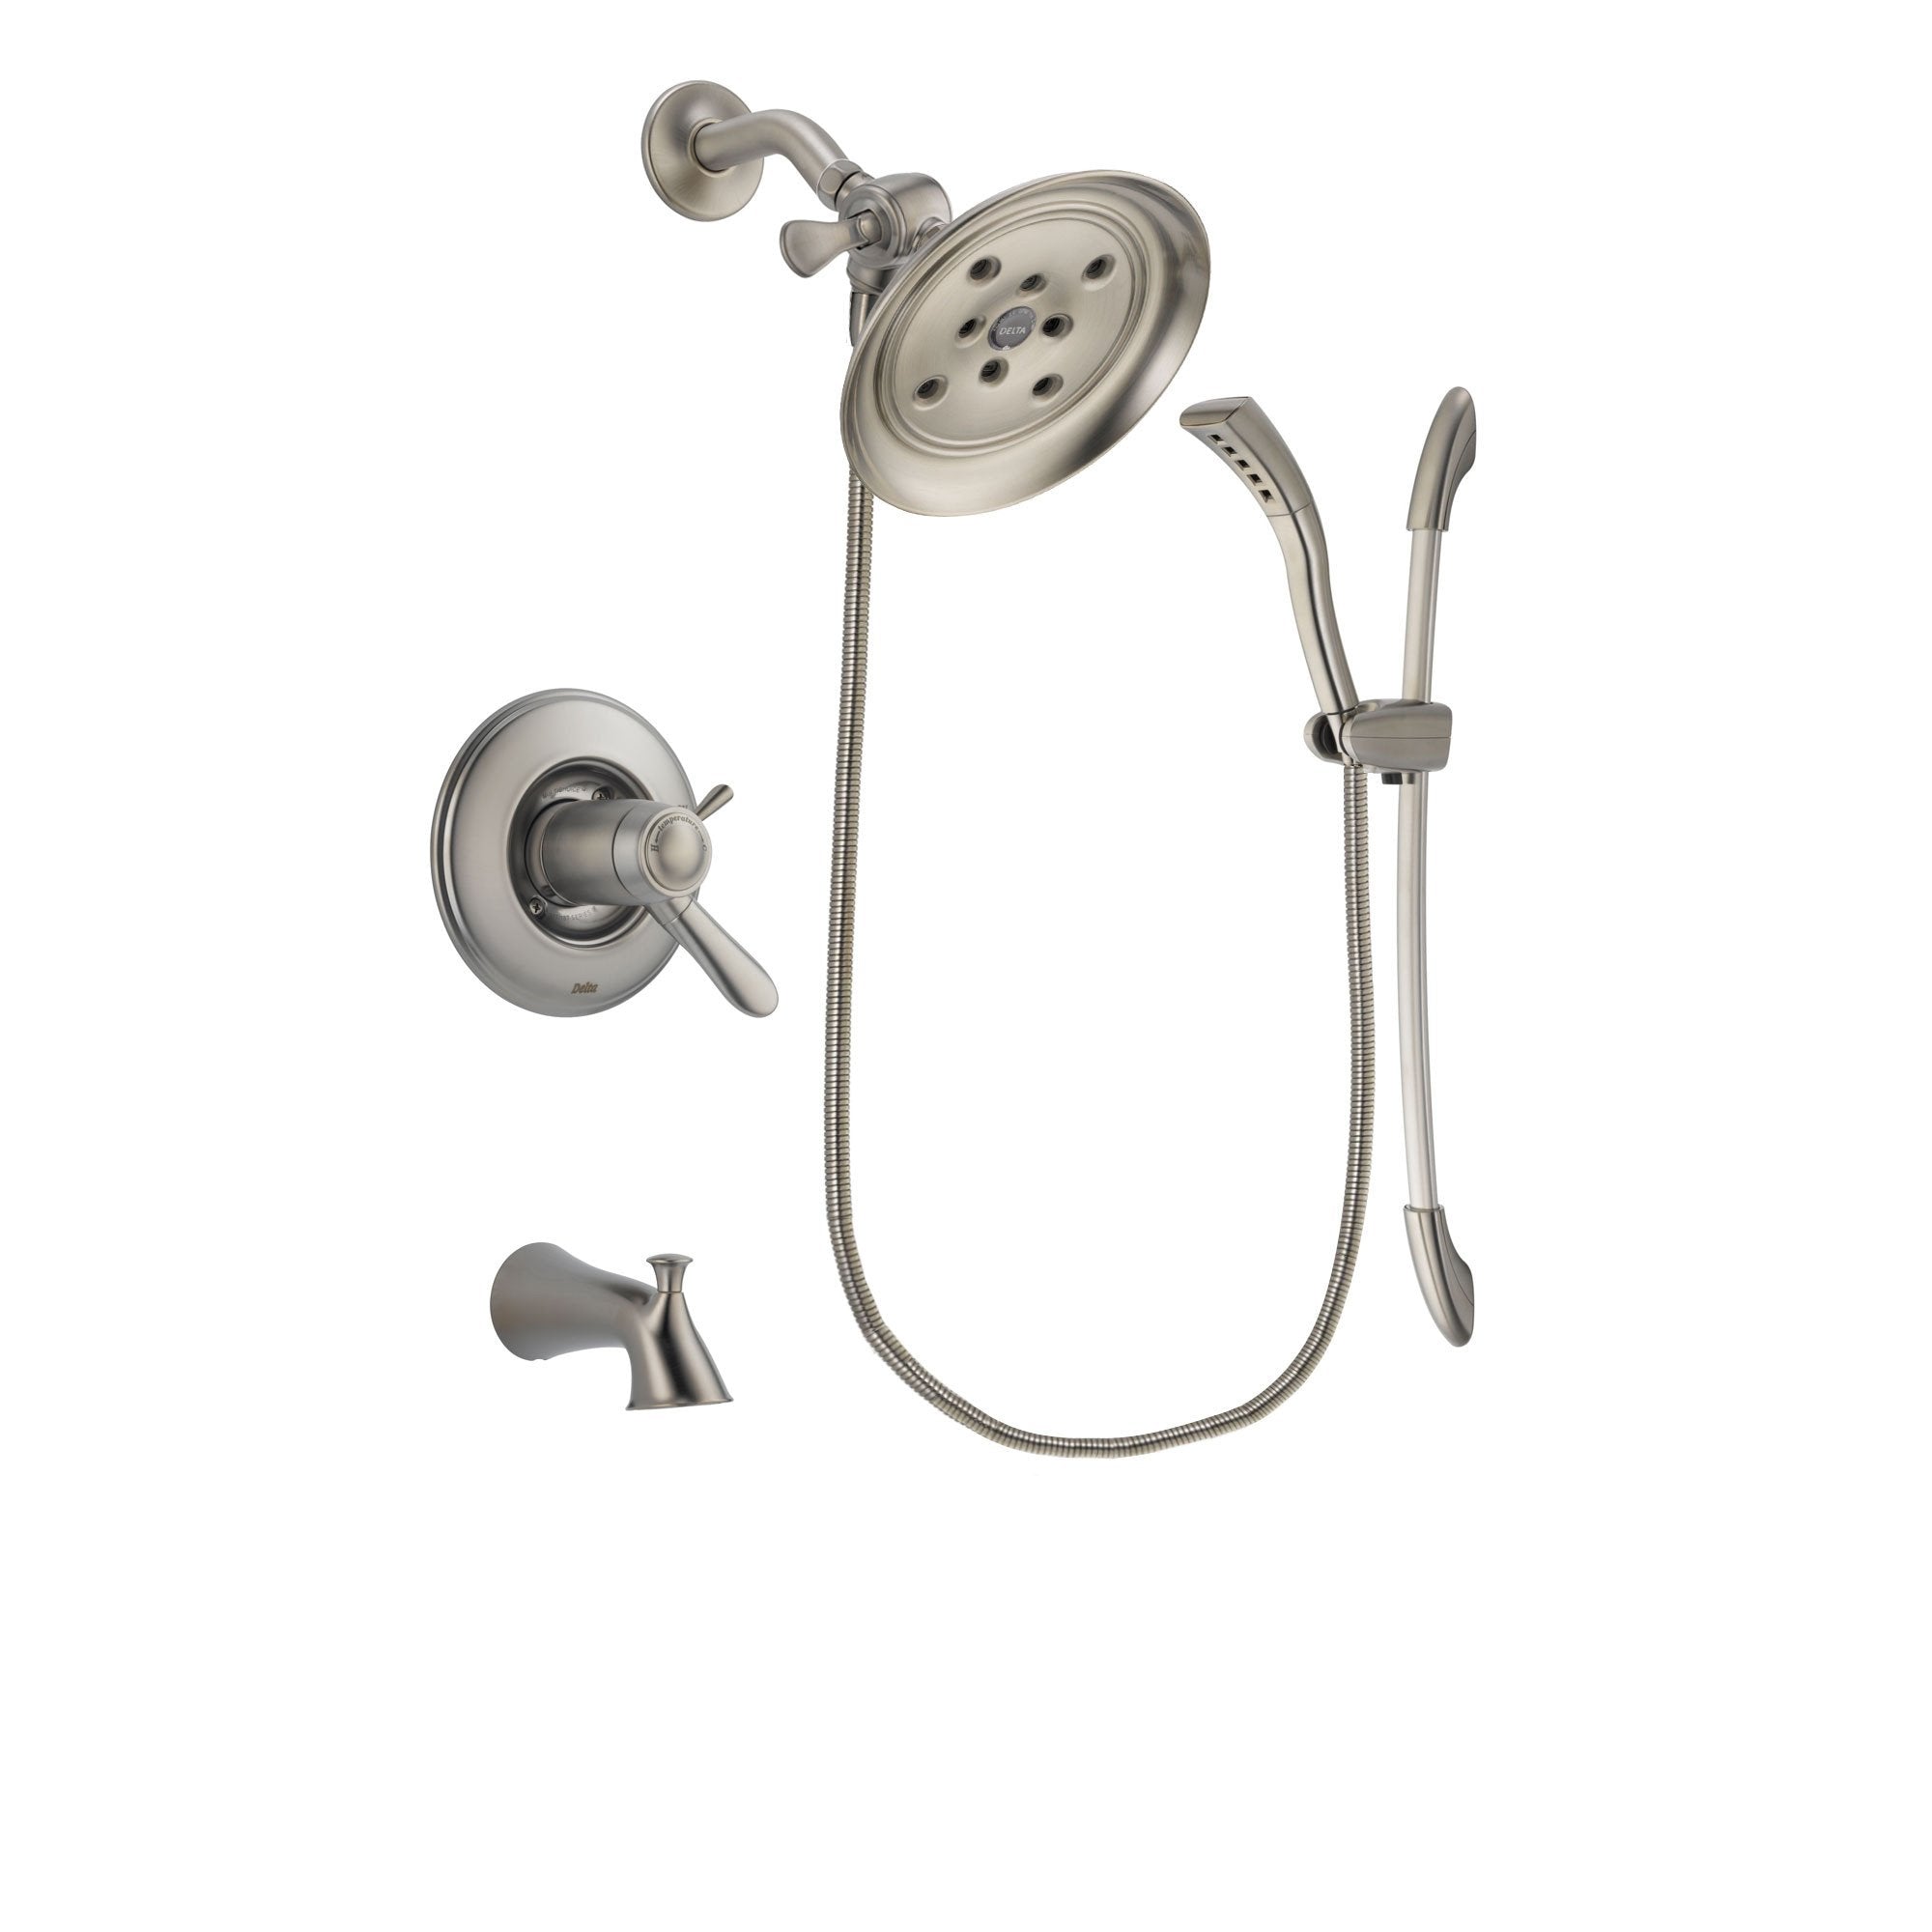 Delta Lahara Stainless Steel Finish Thermostatic Tub and Shower Faucet System Package with Large Rain Showerhead and Handshower with Slide Bar Includes Rough-in Valve and Tub Spout DSP1445V